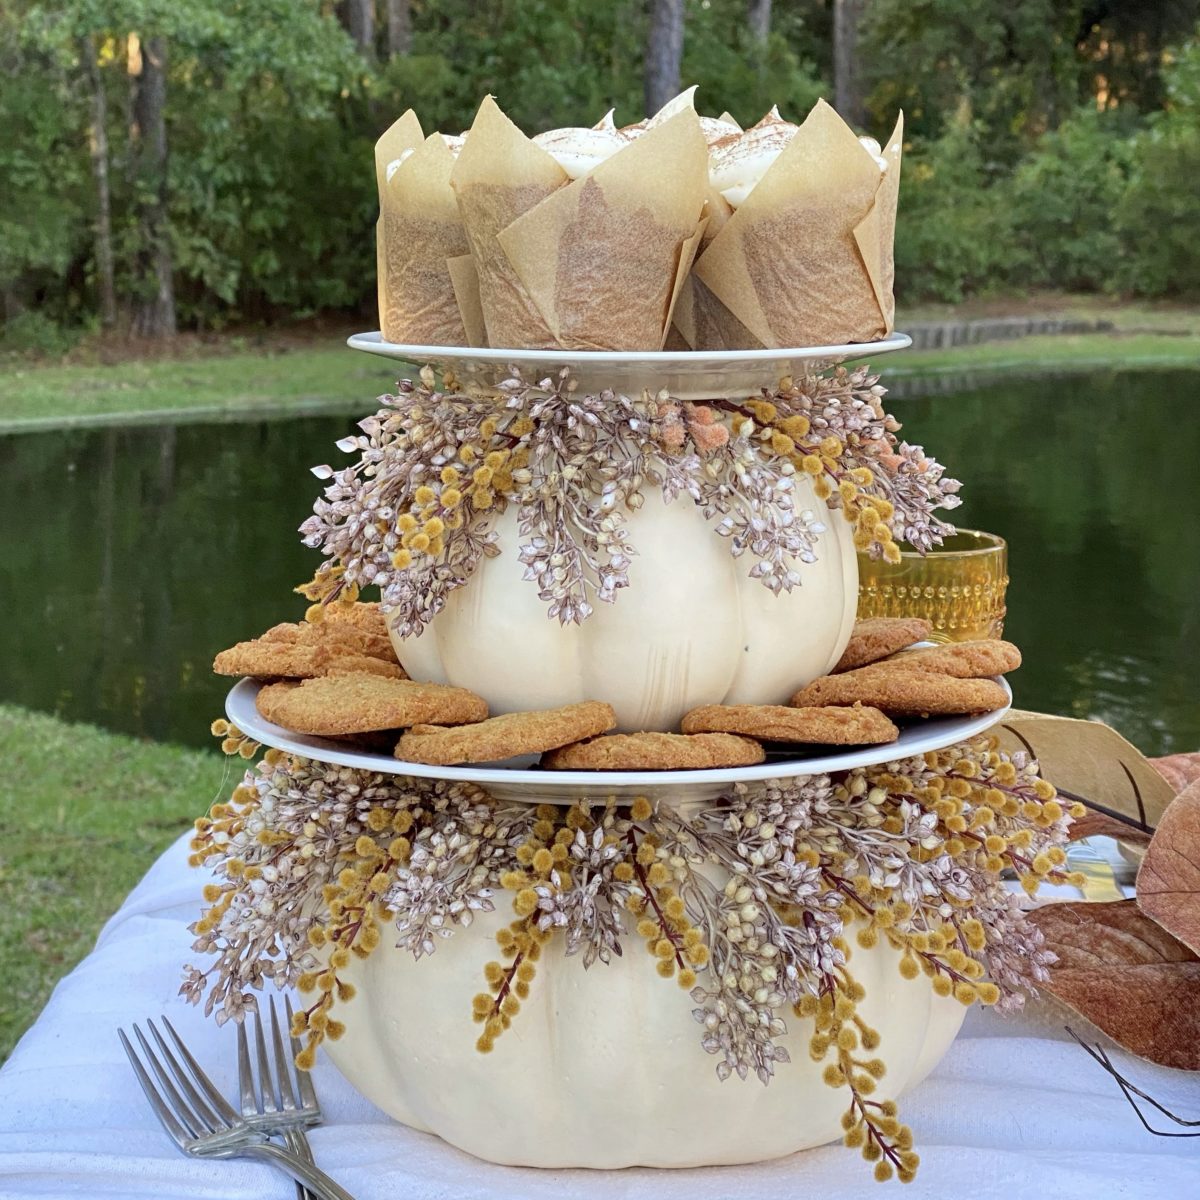 DIY Fall tiered tray with cookies and cupcakes displayed on it on a table by the pond.